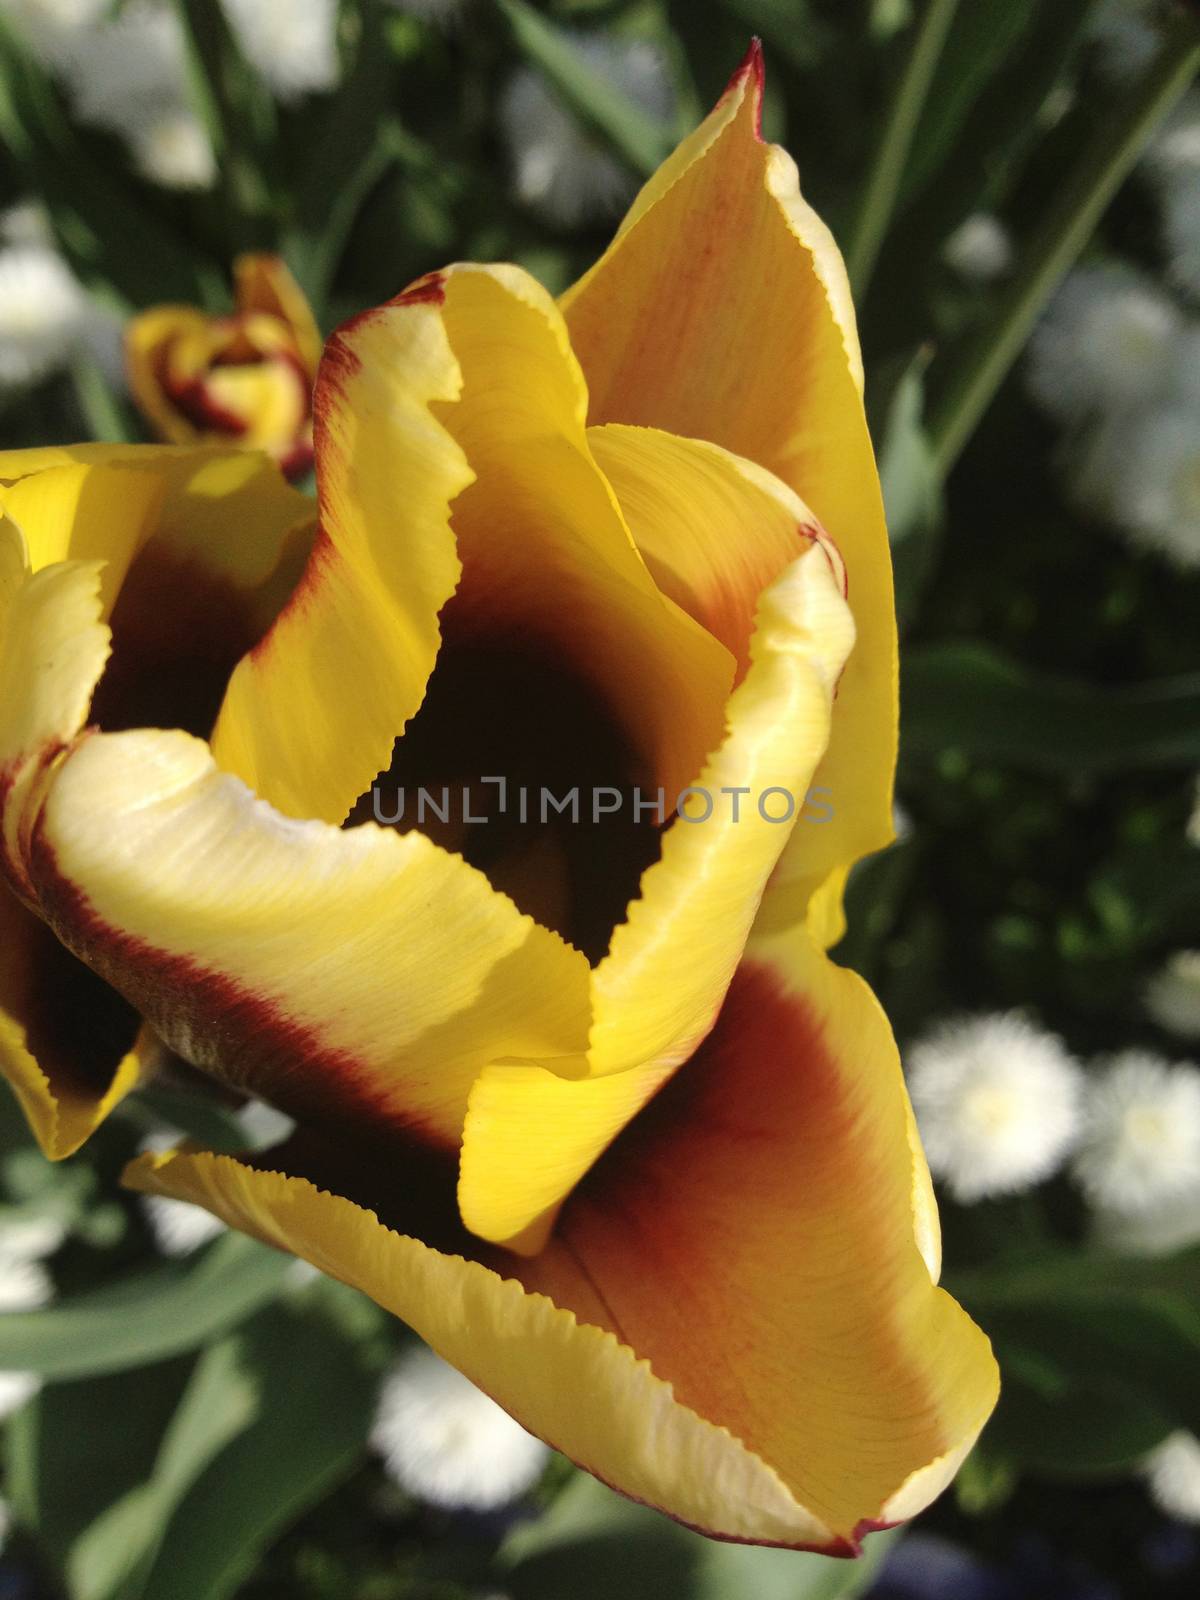 Yellow and red tulip flower partially opened 